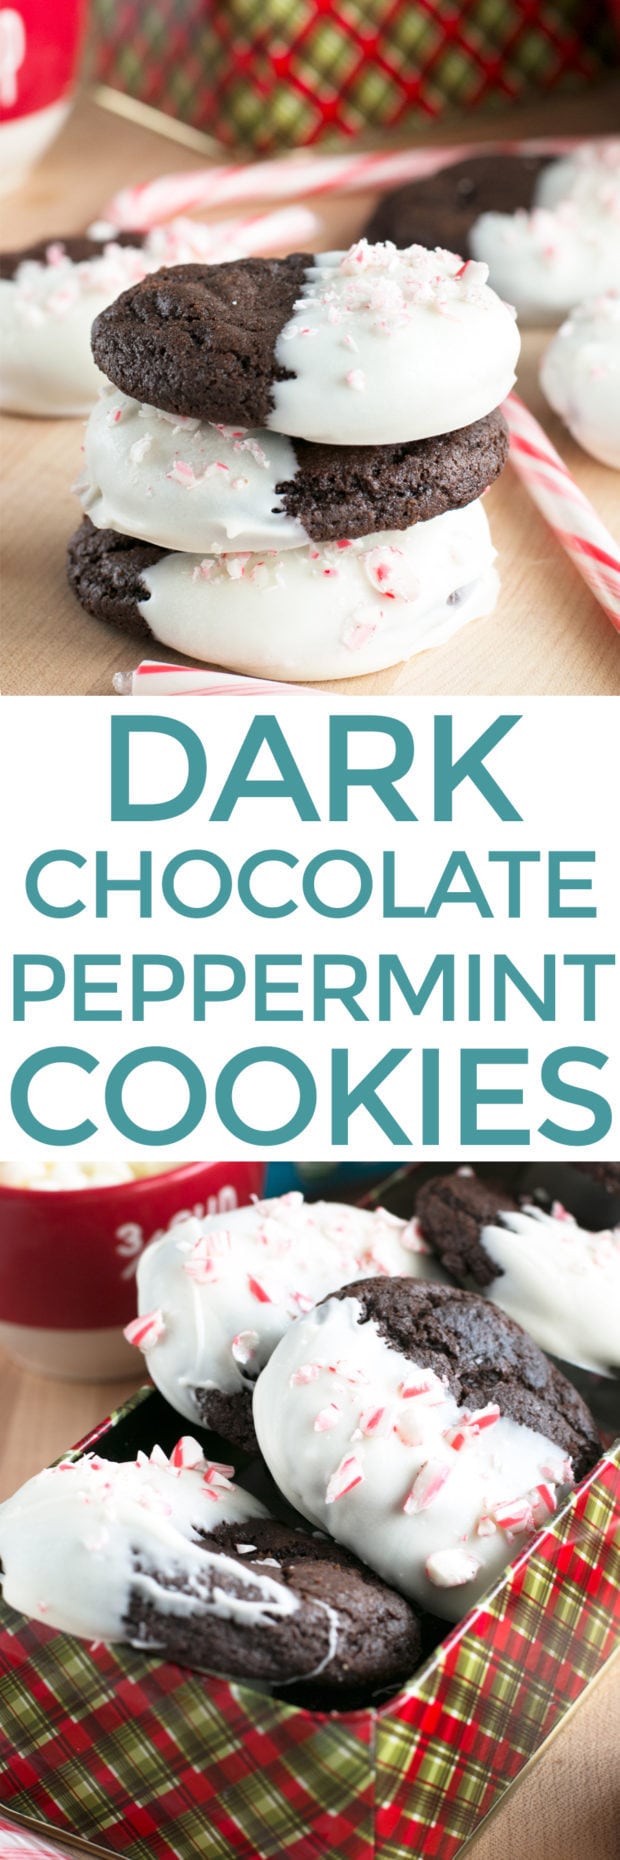 White Chocolate Dipped Dark Chocolate Peppermint Cookies | cakenknife.com #ad #12daysofgiveaways #christmas #recipe